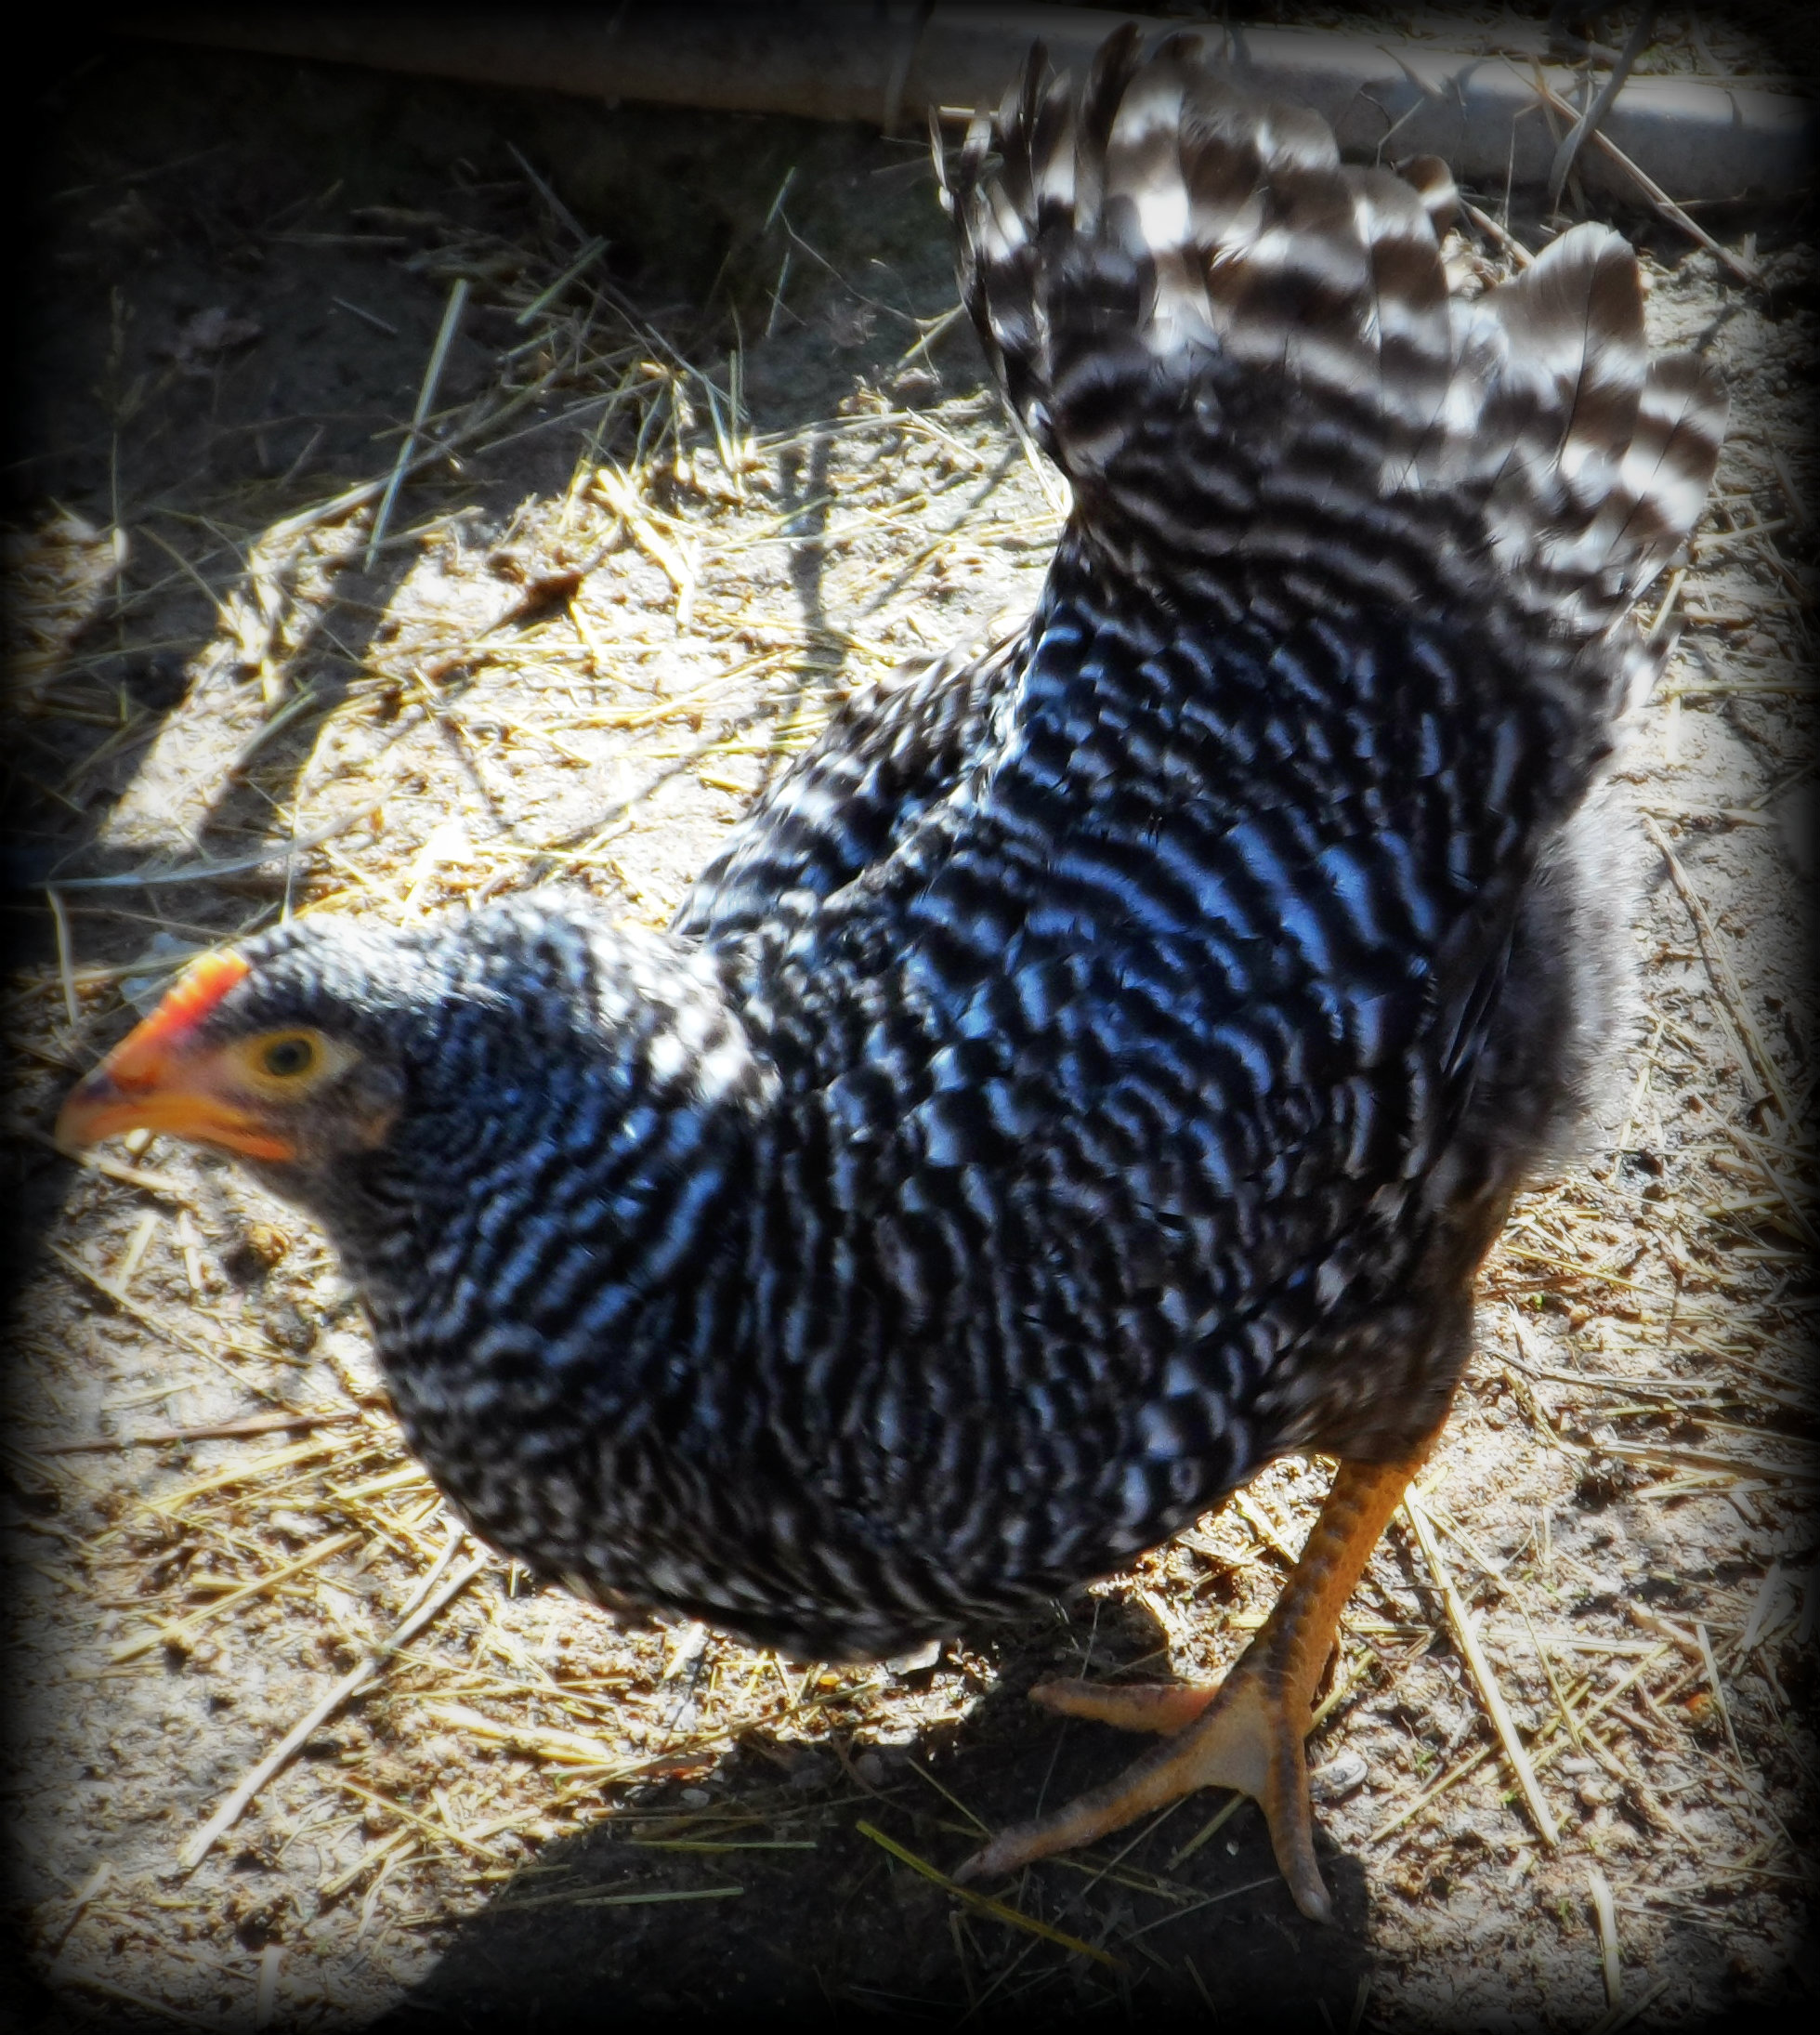 My new Barred Rock Pullet! Can't wait to get them w/ the rest of my flock!